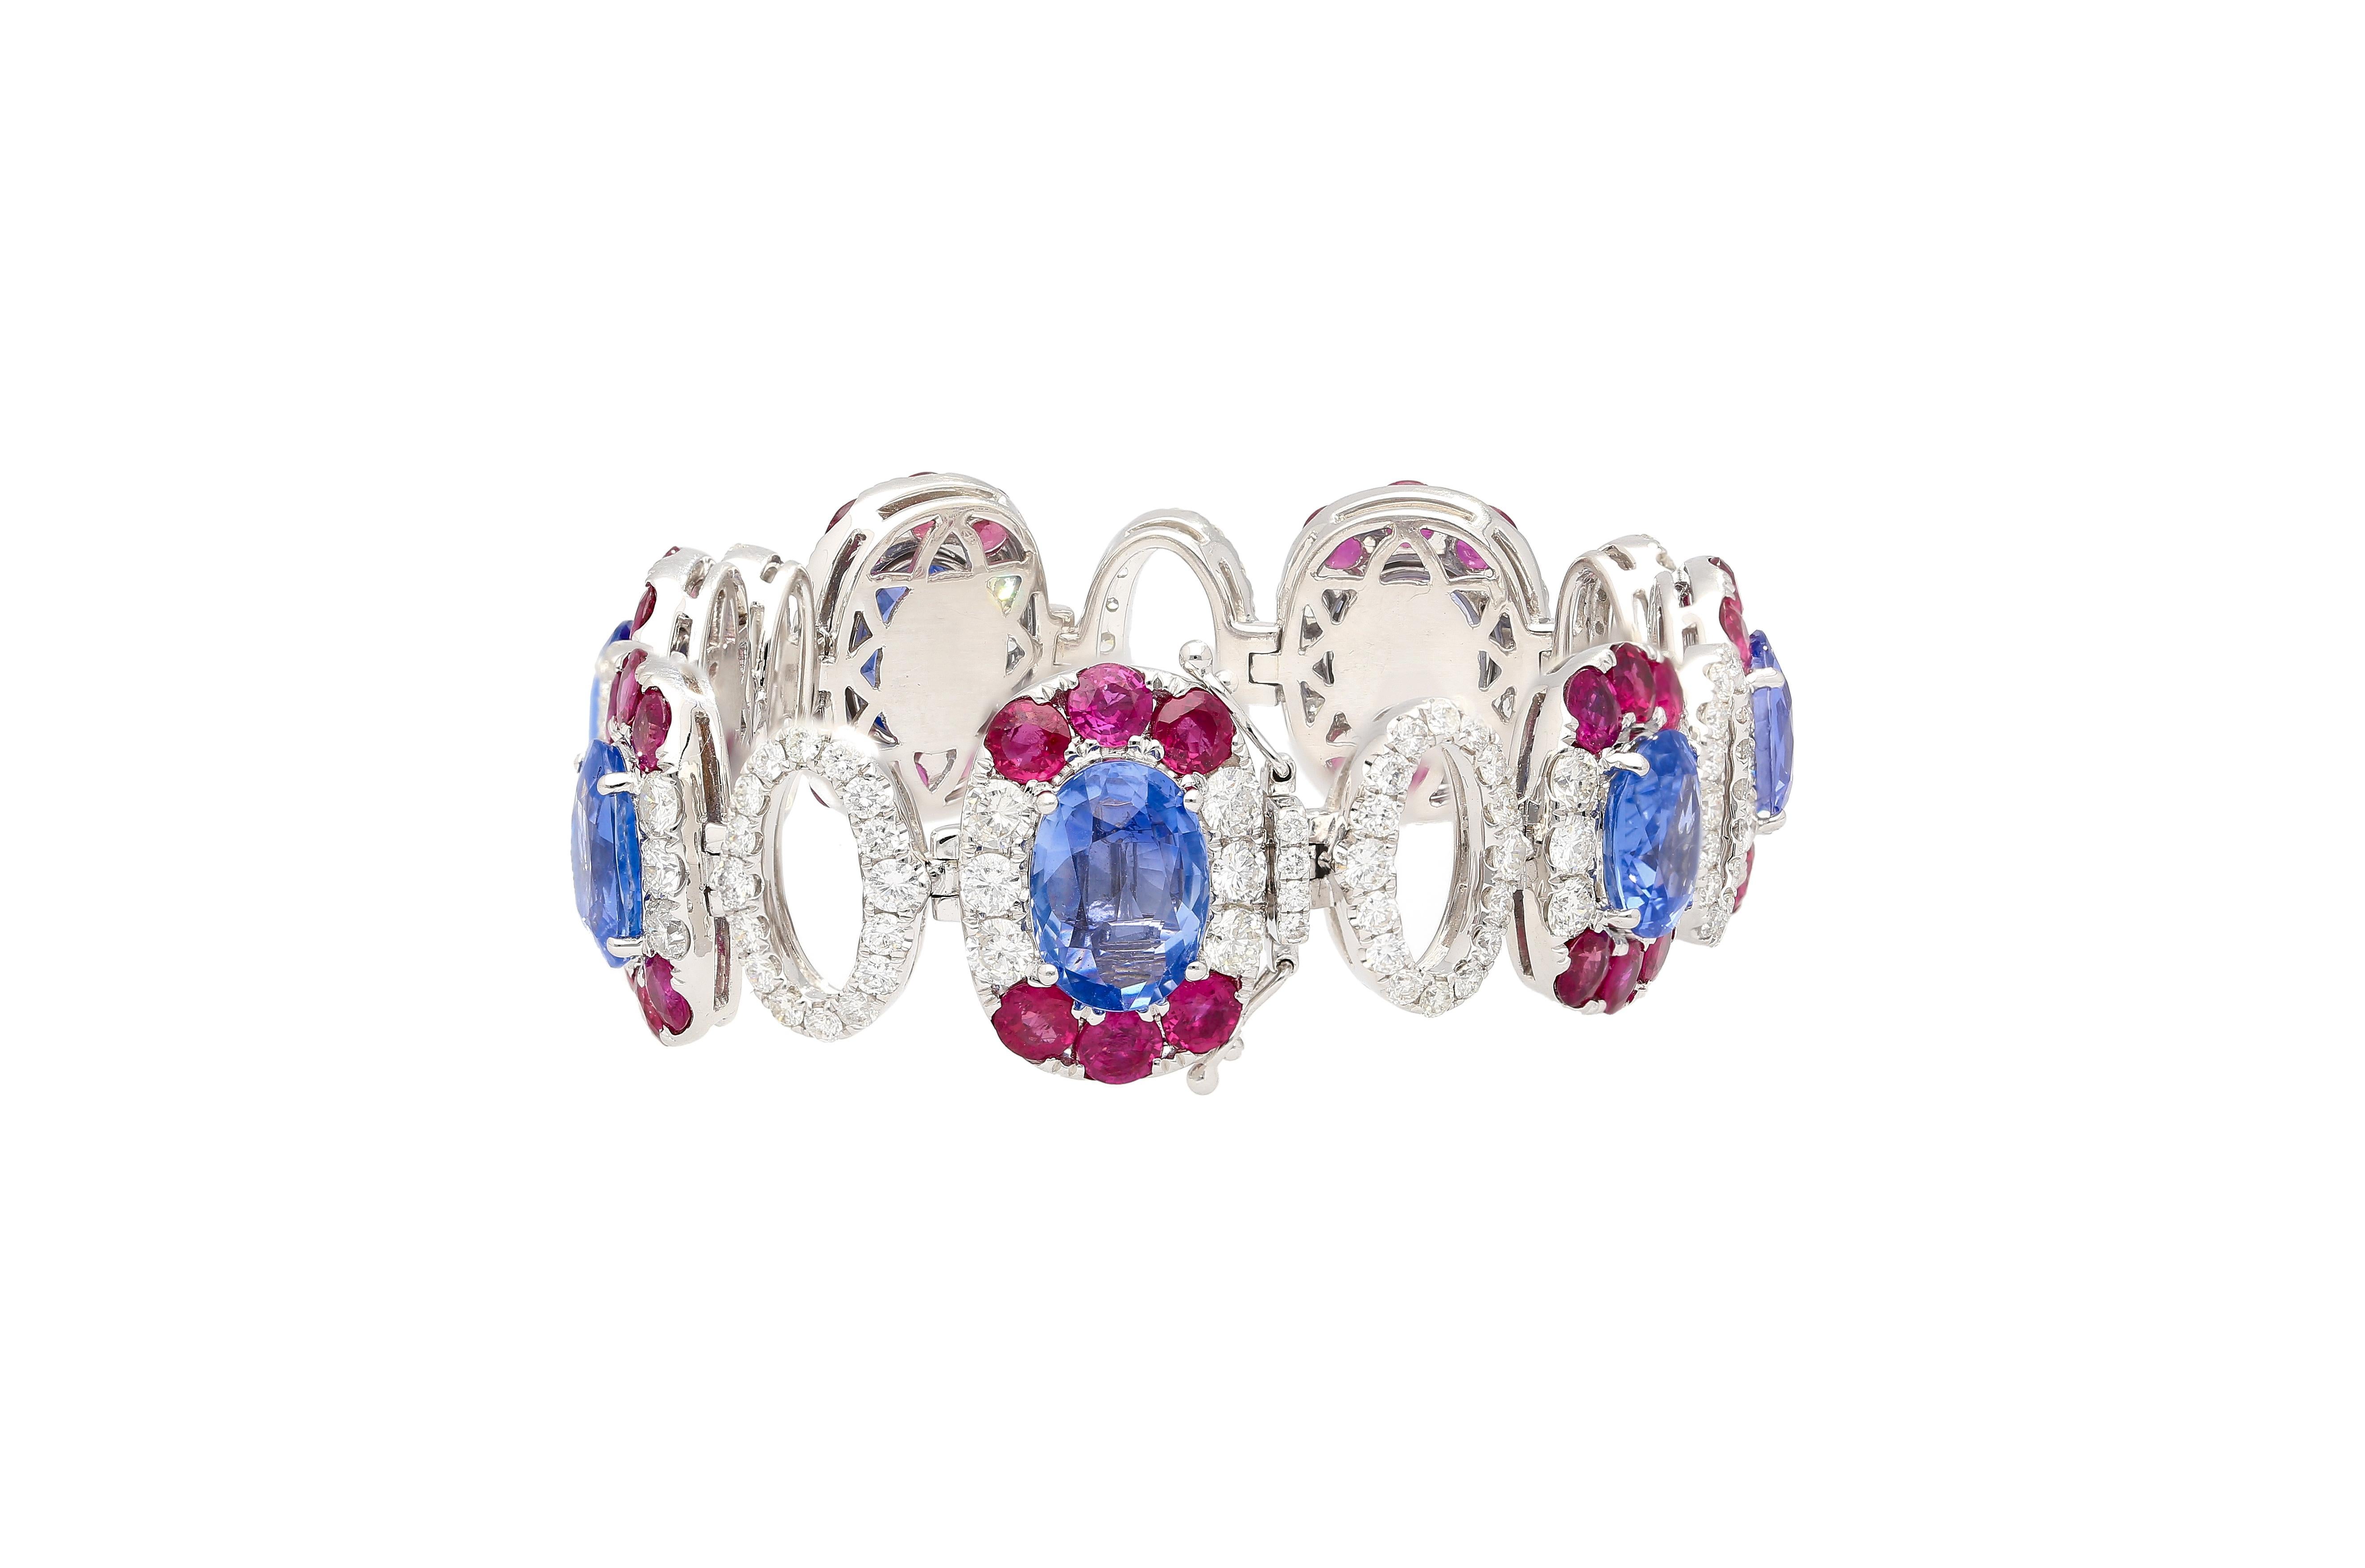 18k white gold oval shaped multi gemstone link bracelet. Featuring 7 oval cut no heat natural blue sapphires. Each of which is GRS certified. 

Enhancing the bracelet's opulence are 154 round-cut Diamonds totaling 6.93 carats and 42 round-cut Rubies